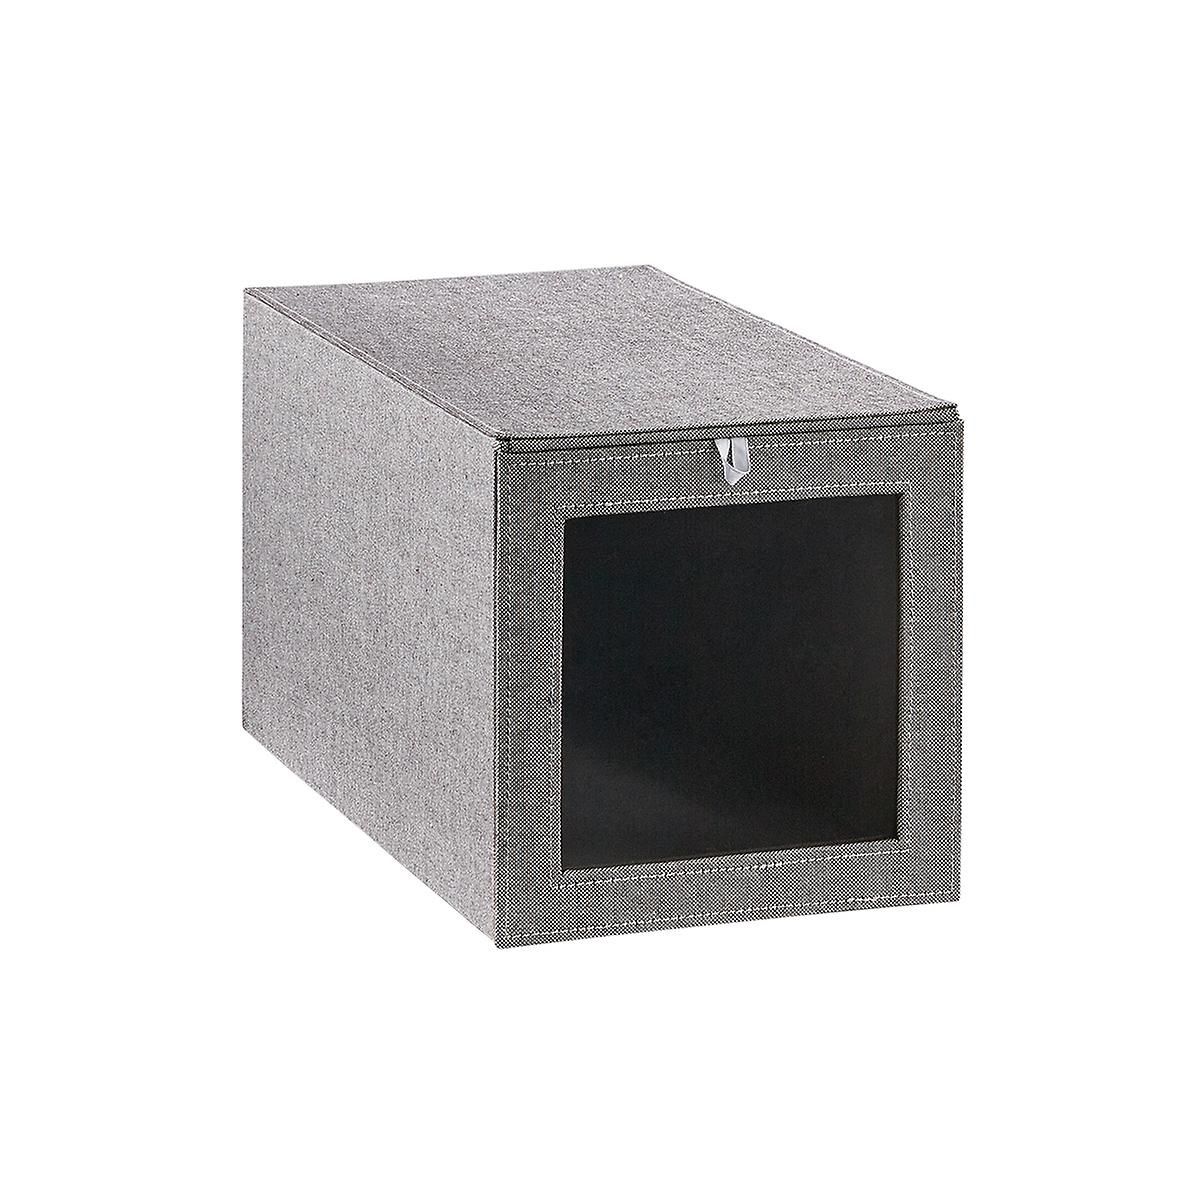 Cambridge Drop-Front Tall Shoe Box Grey | The Container Store